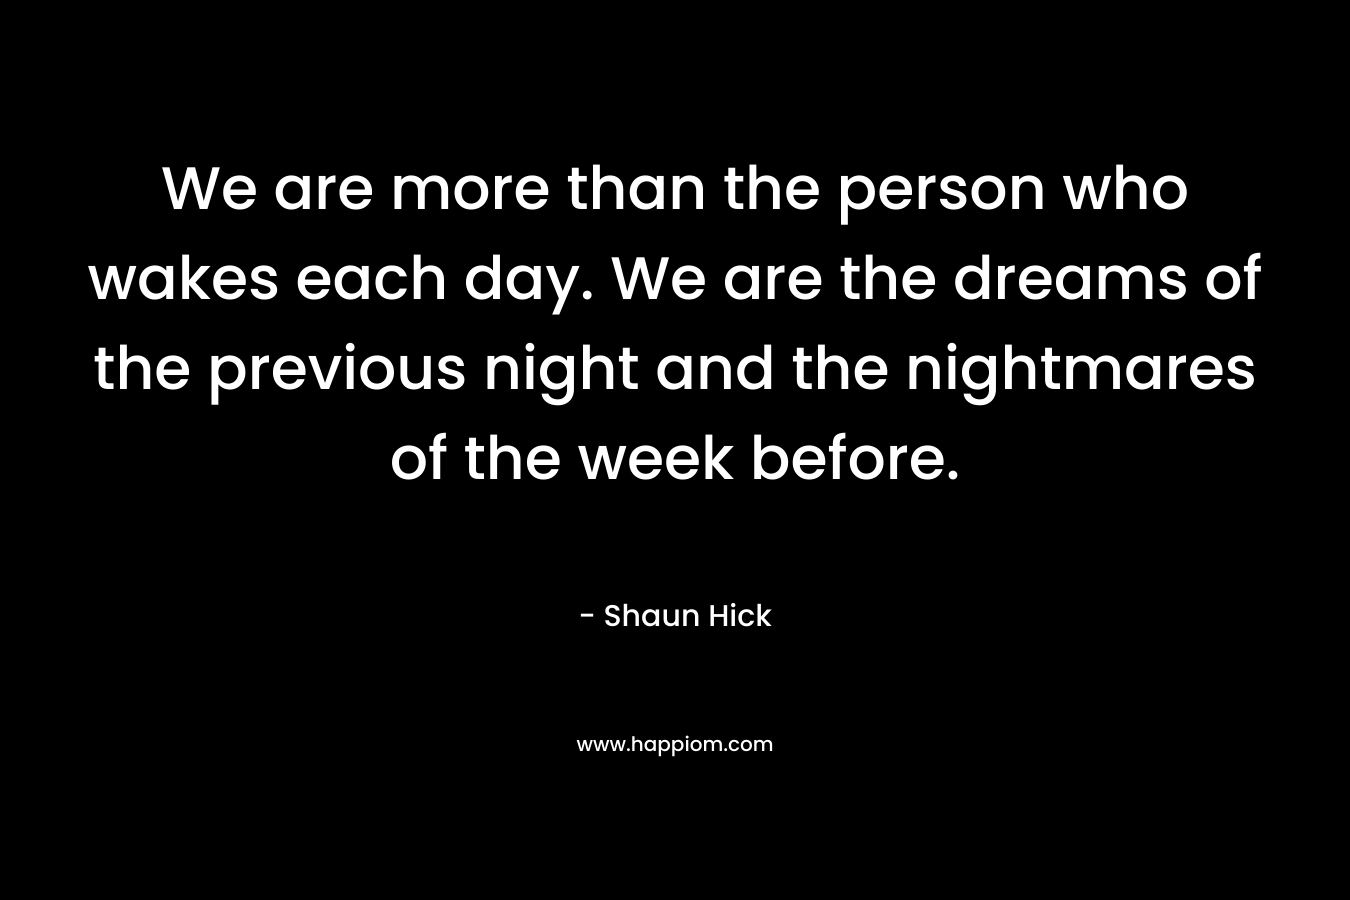 We are more than the person who wakes each day. We are the dreams of the previous night and the nightmares of the week before. – Shaun Hick